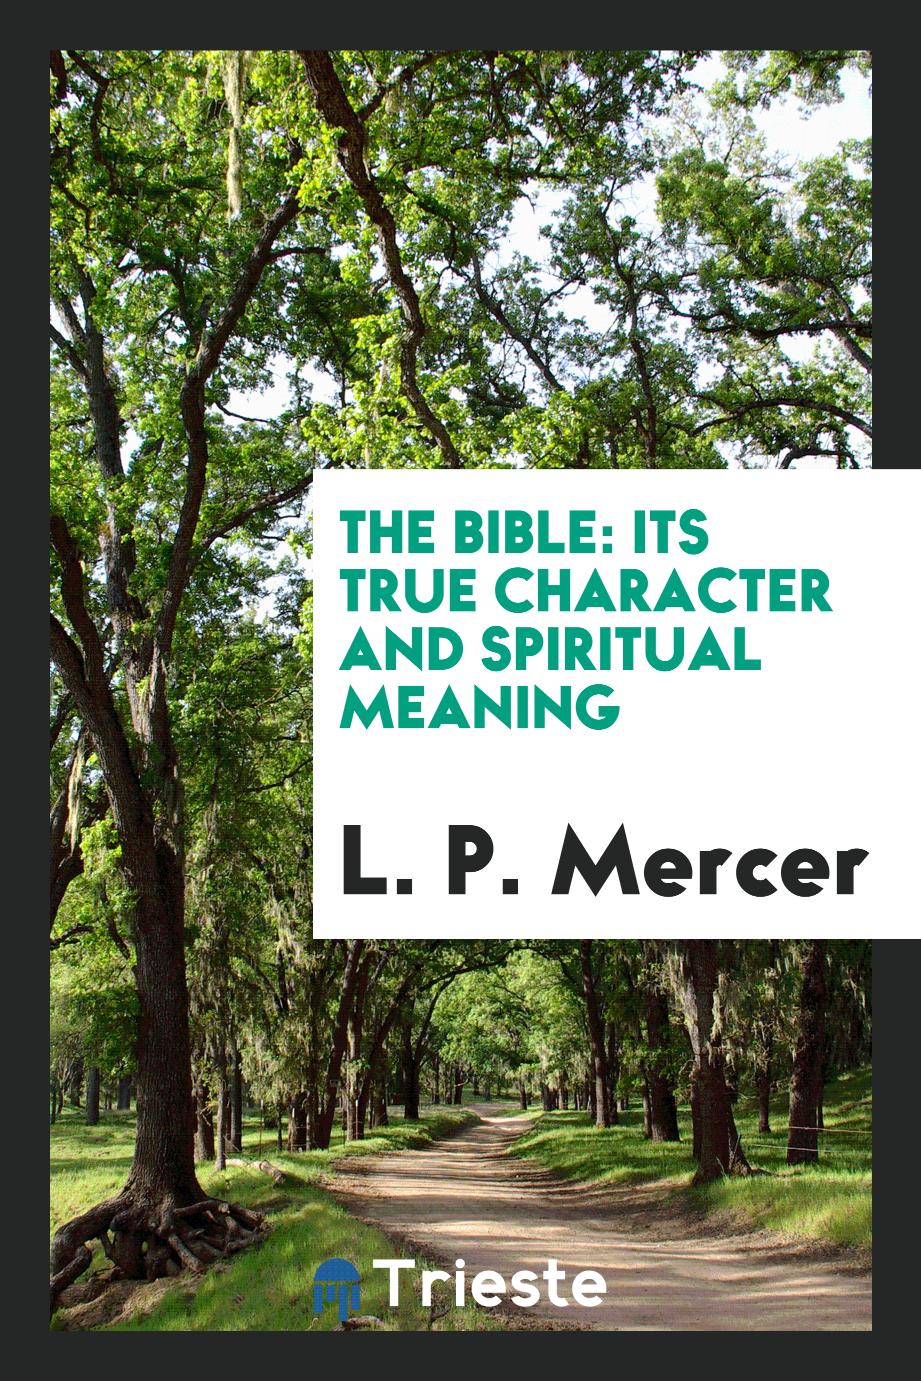 The Bible: its true character and spiritual meaning